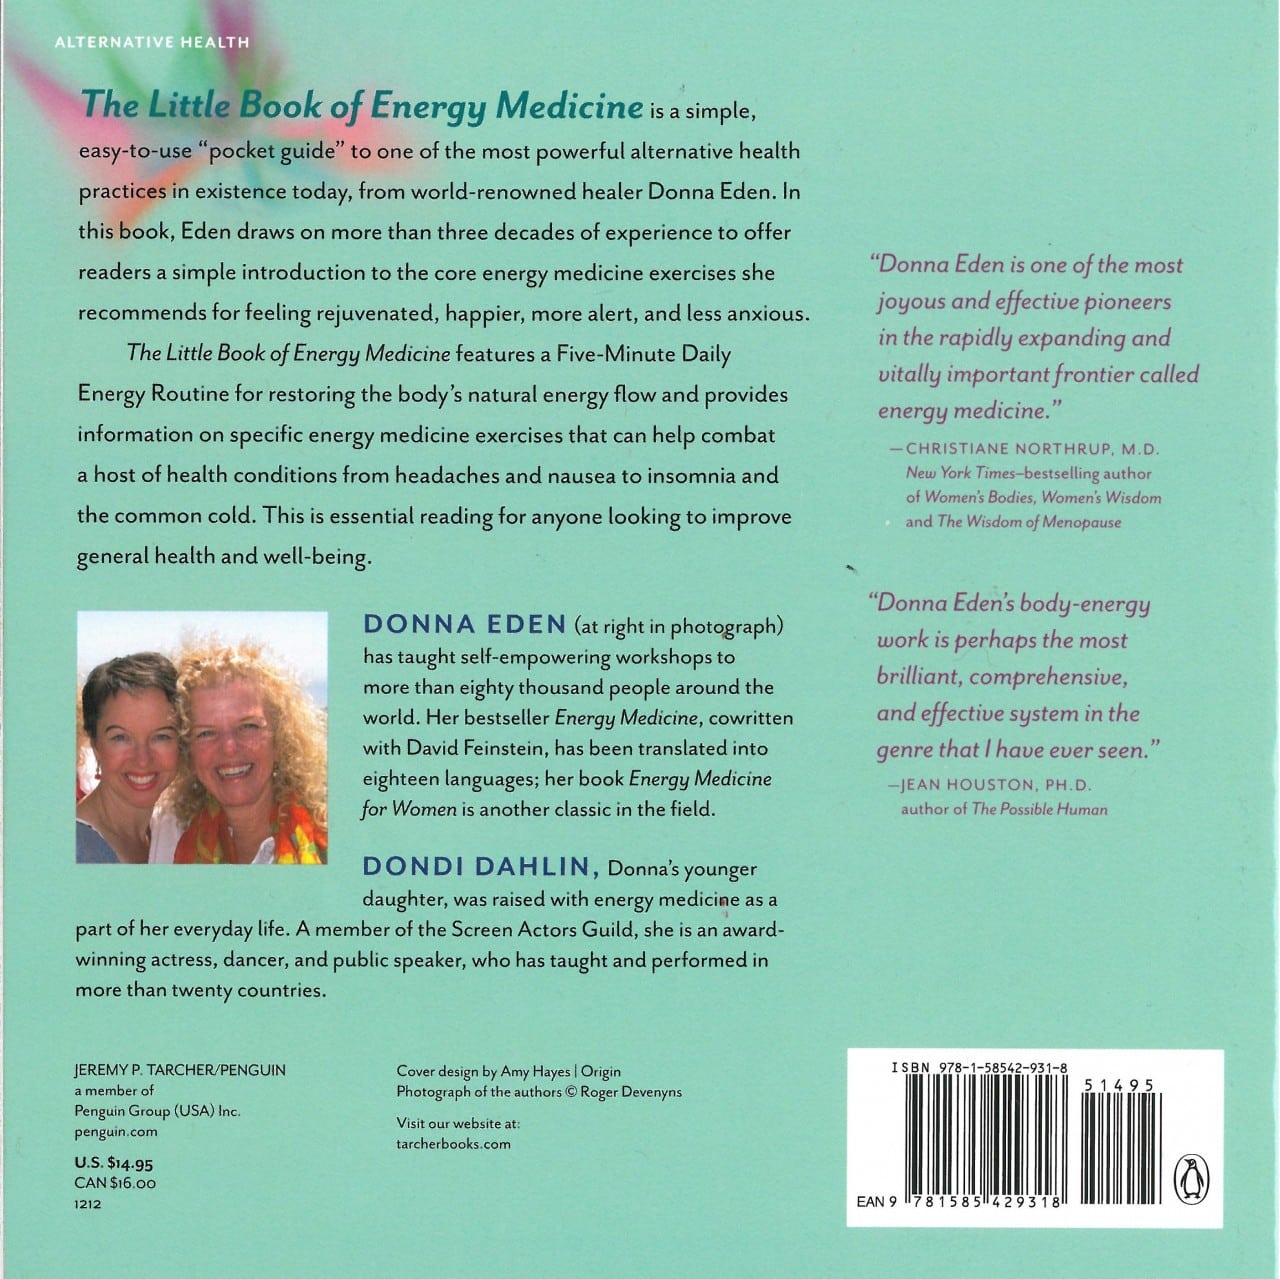 The Little Book of Energy Medicine